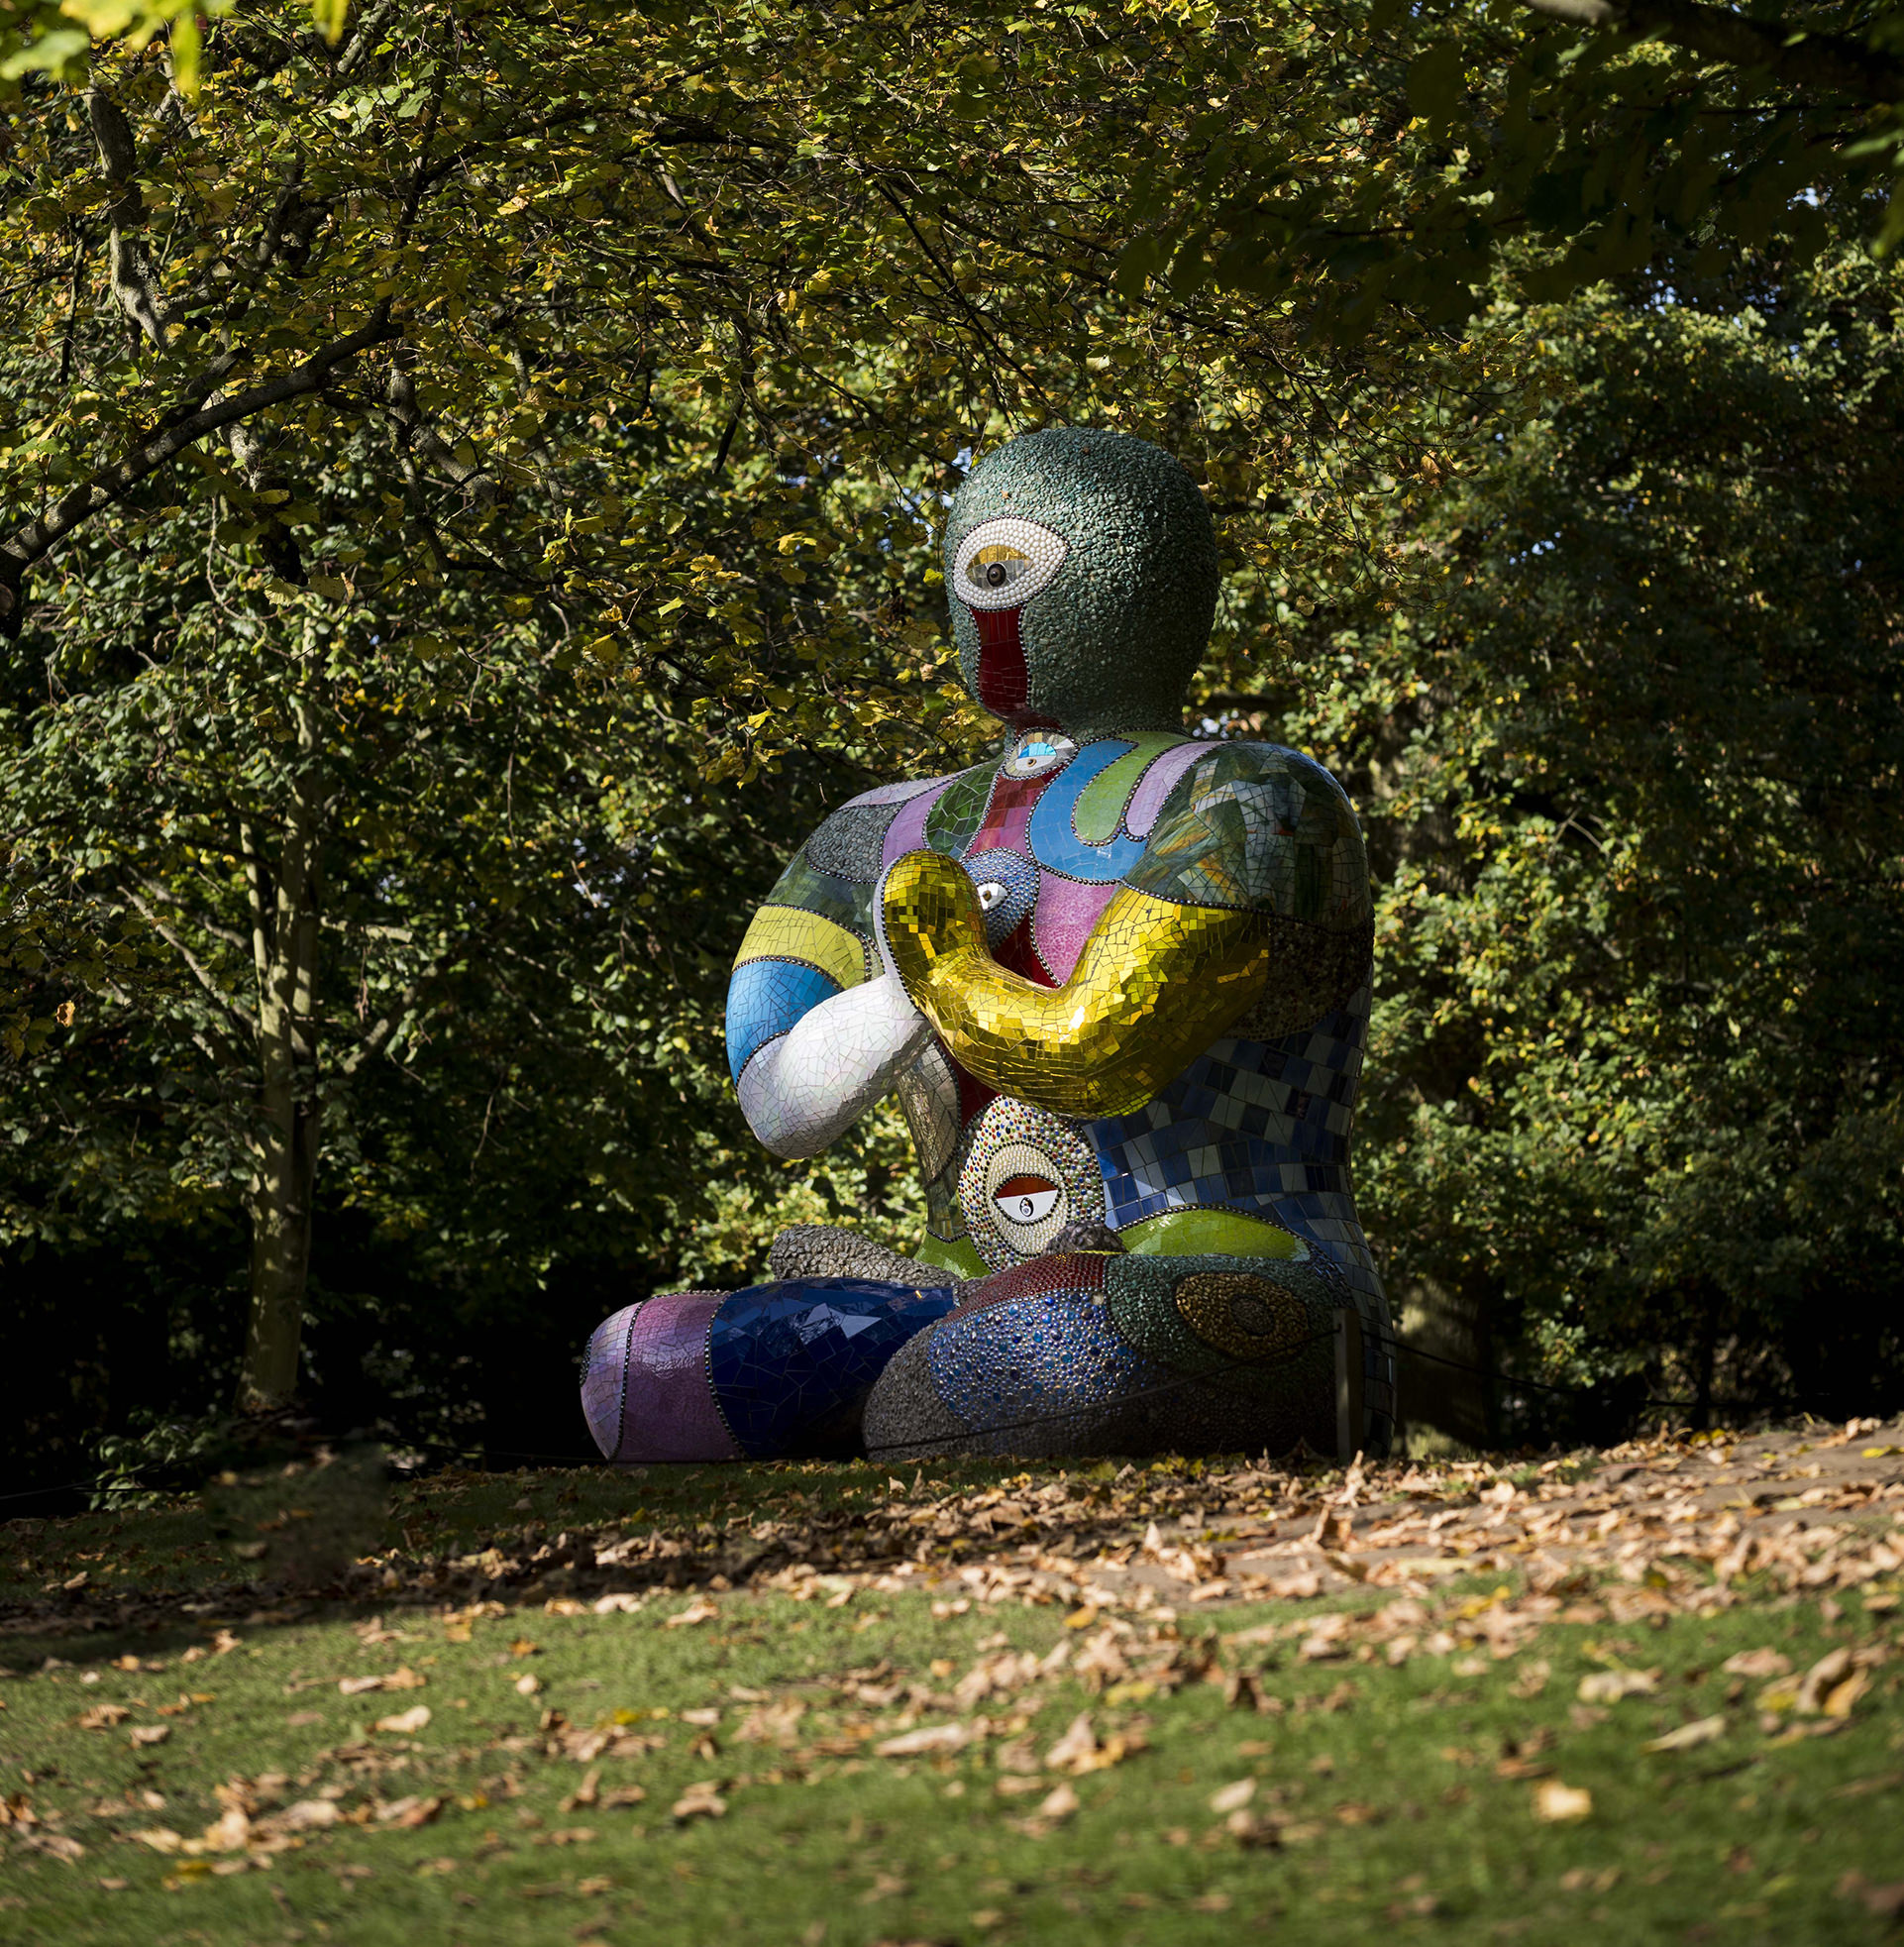 A seated humanoid figure covered in brightly coloured mosaic tiles